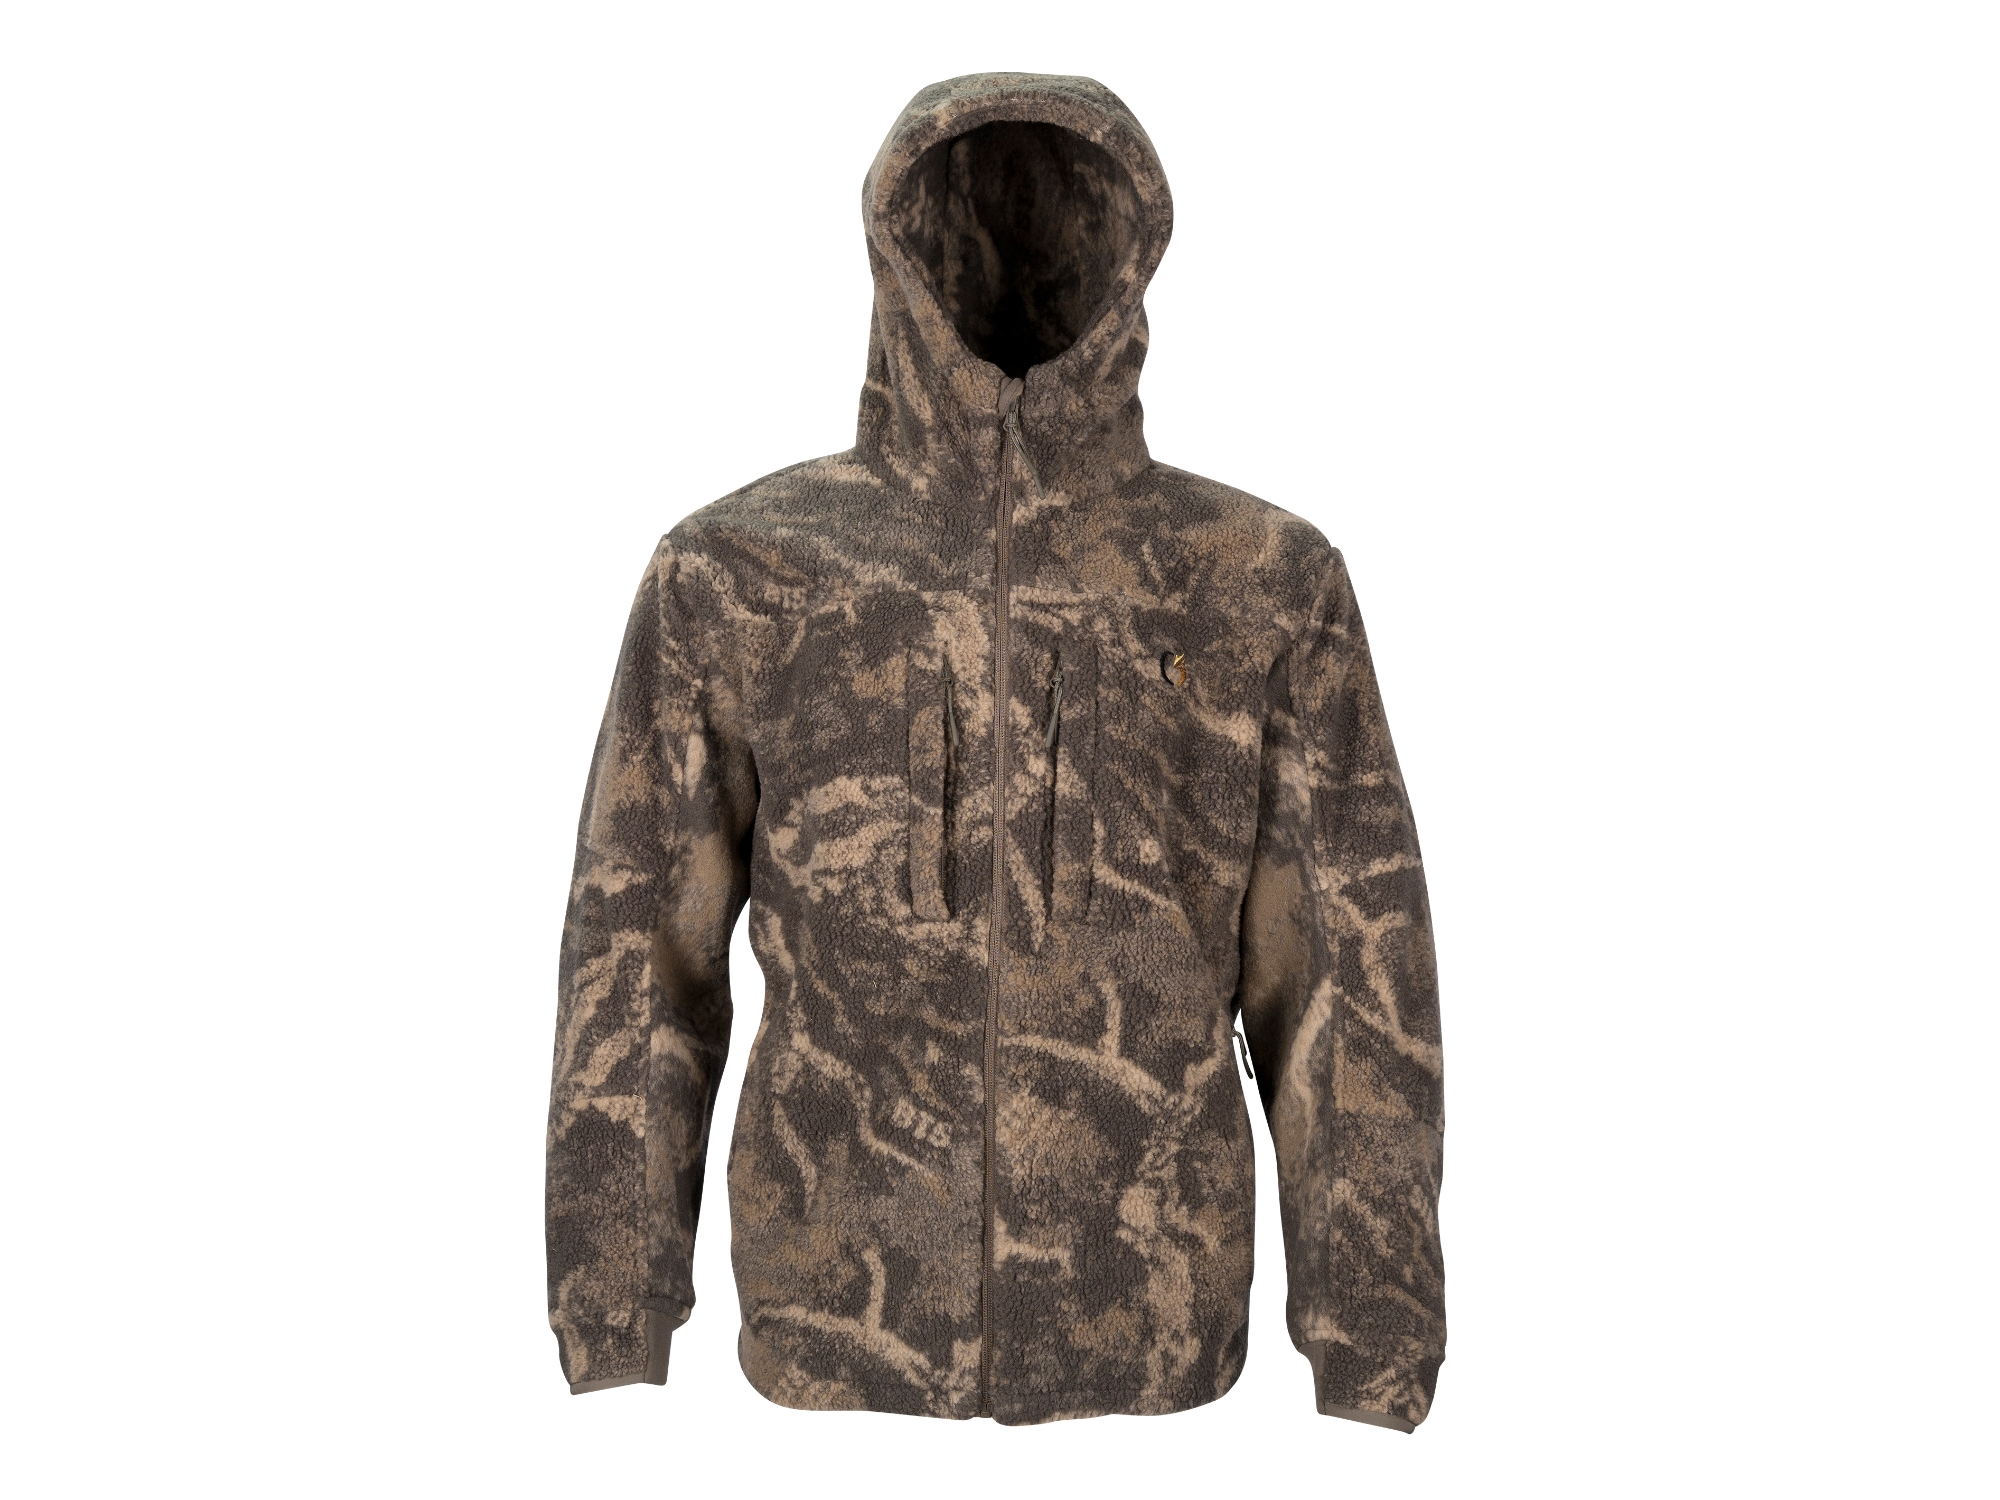 Code of Silence Zone 7 - Dialed In Parka, XL-Tall, S-18 CAMO